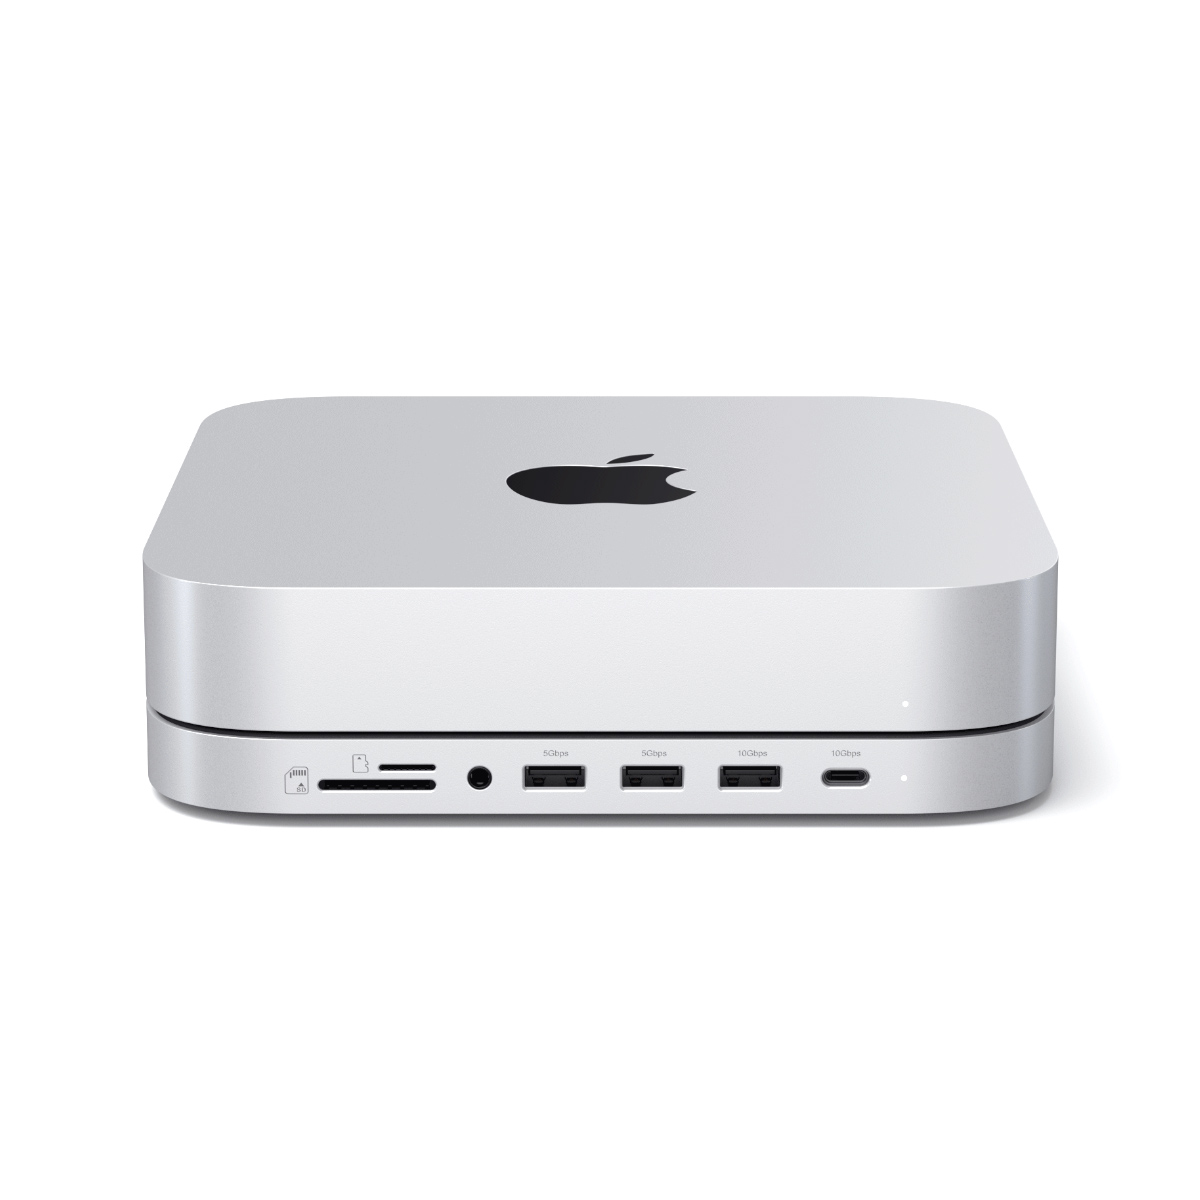 Satechi Stand & Hub for Mac Mini with SSD NVMe